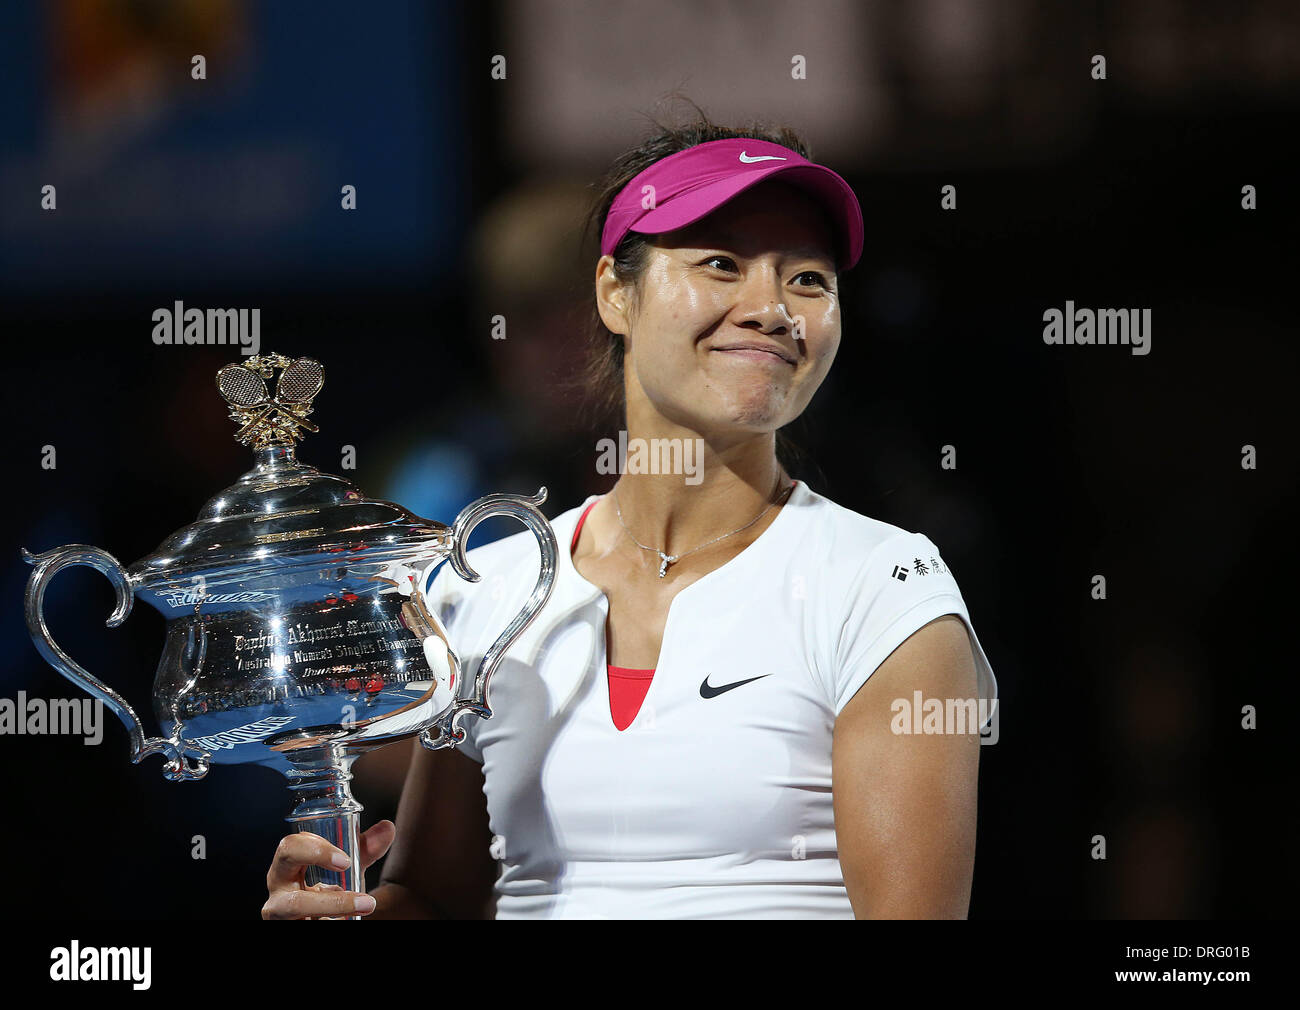 (140125) -- MELBOURNE, Jan. 25, 2014 (Xinhua) -- Li Na of China shows her trophy during the awards ceremony after winning her women's singles final match against Dominika Cibulkova of Slovakia at 2014 Australian Open Stock Photo